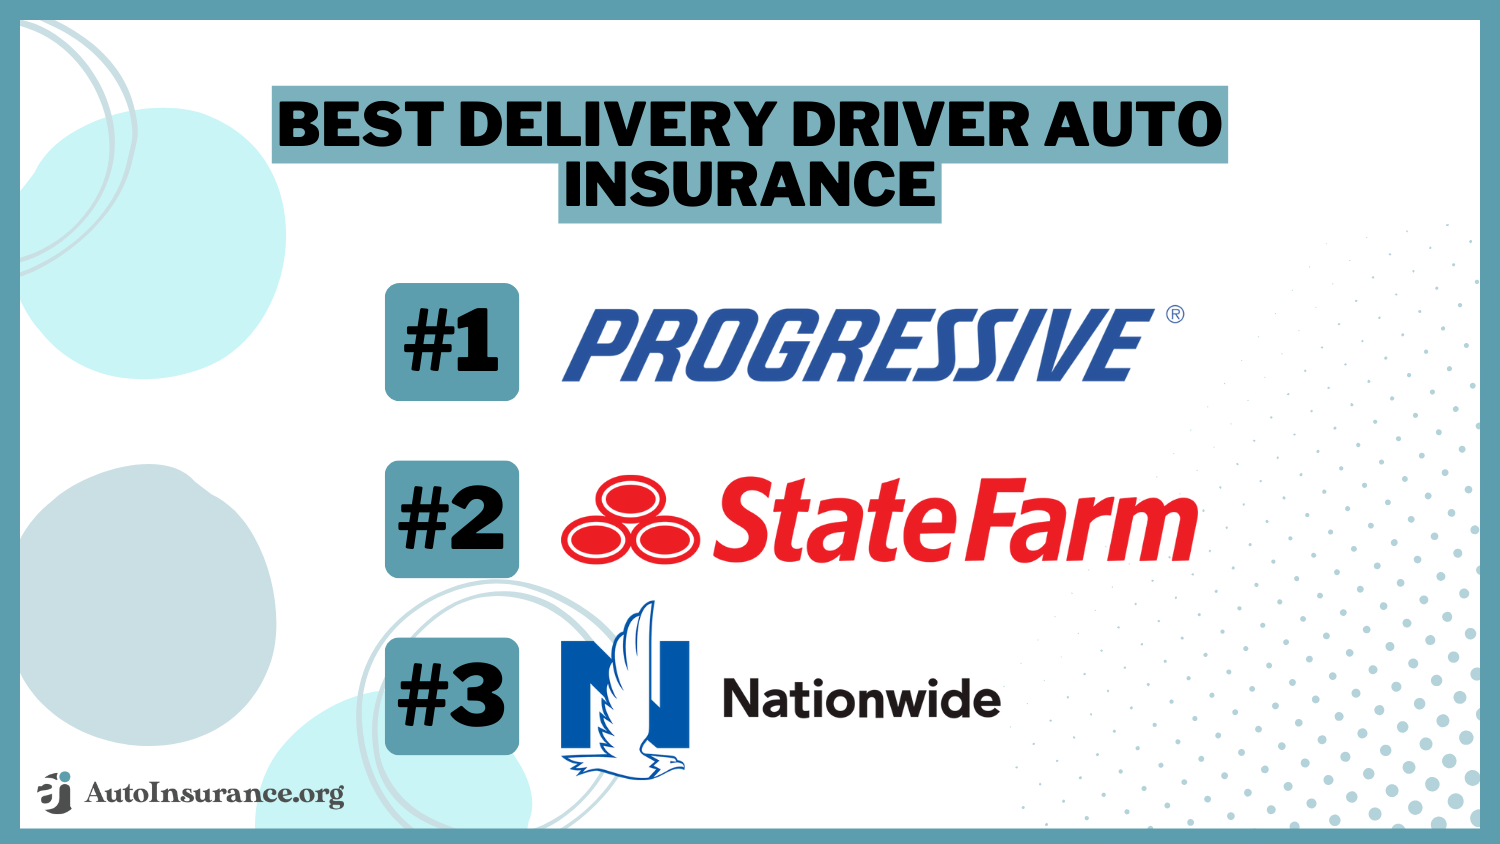 Best Delivery Driver Auto Insurance: Progressive, State Farm, and Nationwide